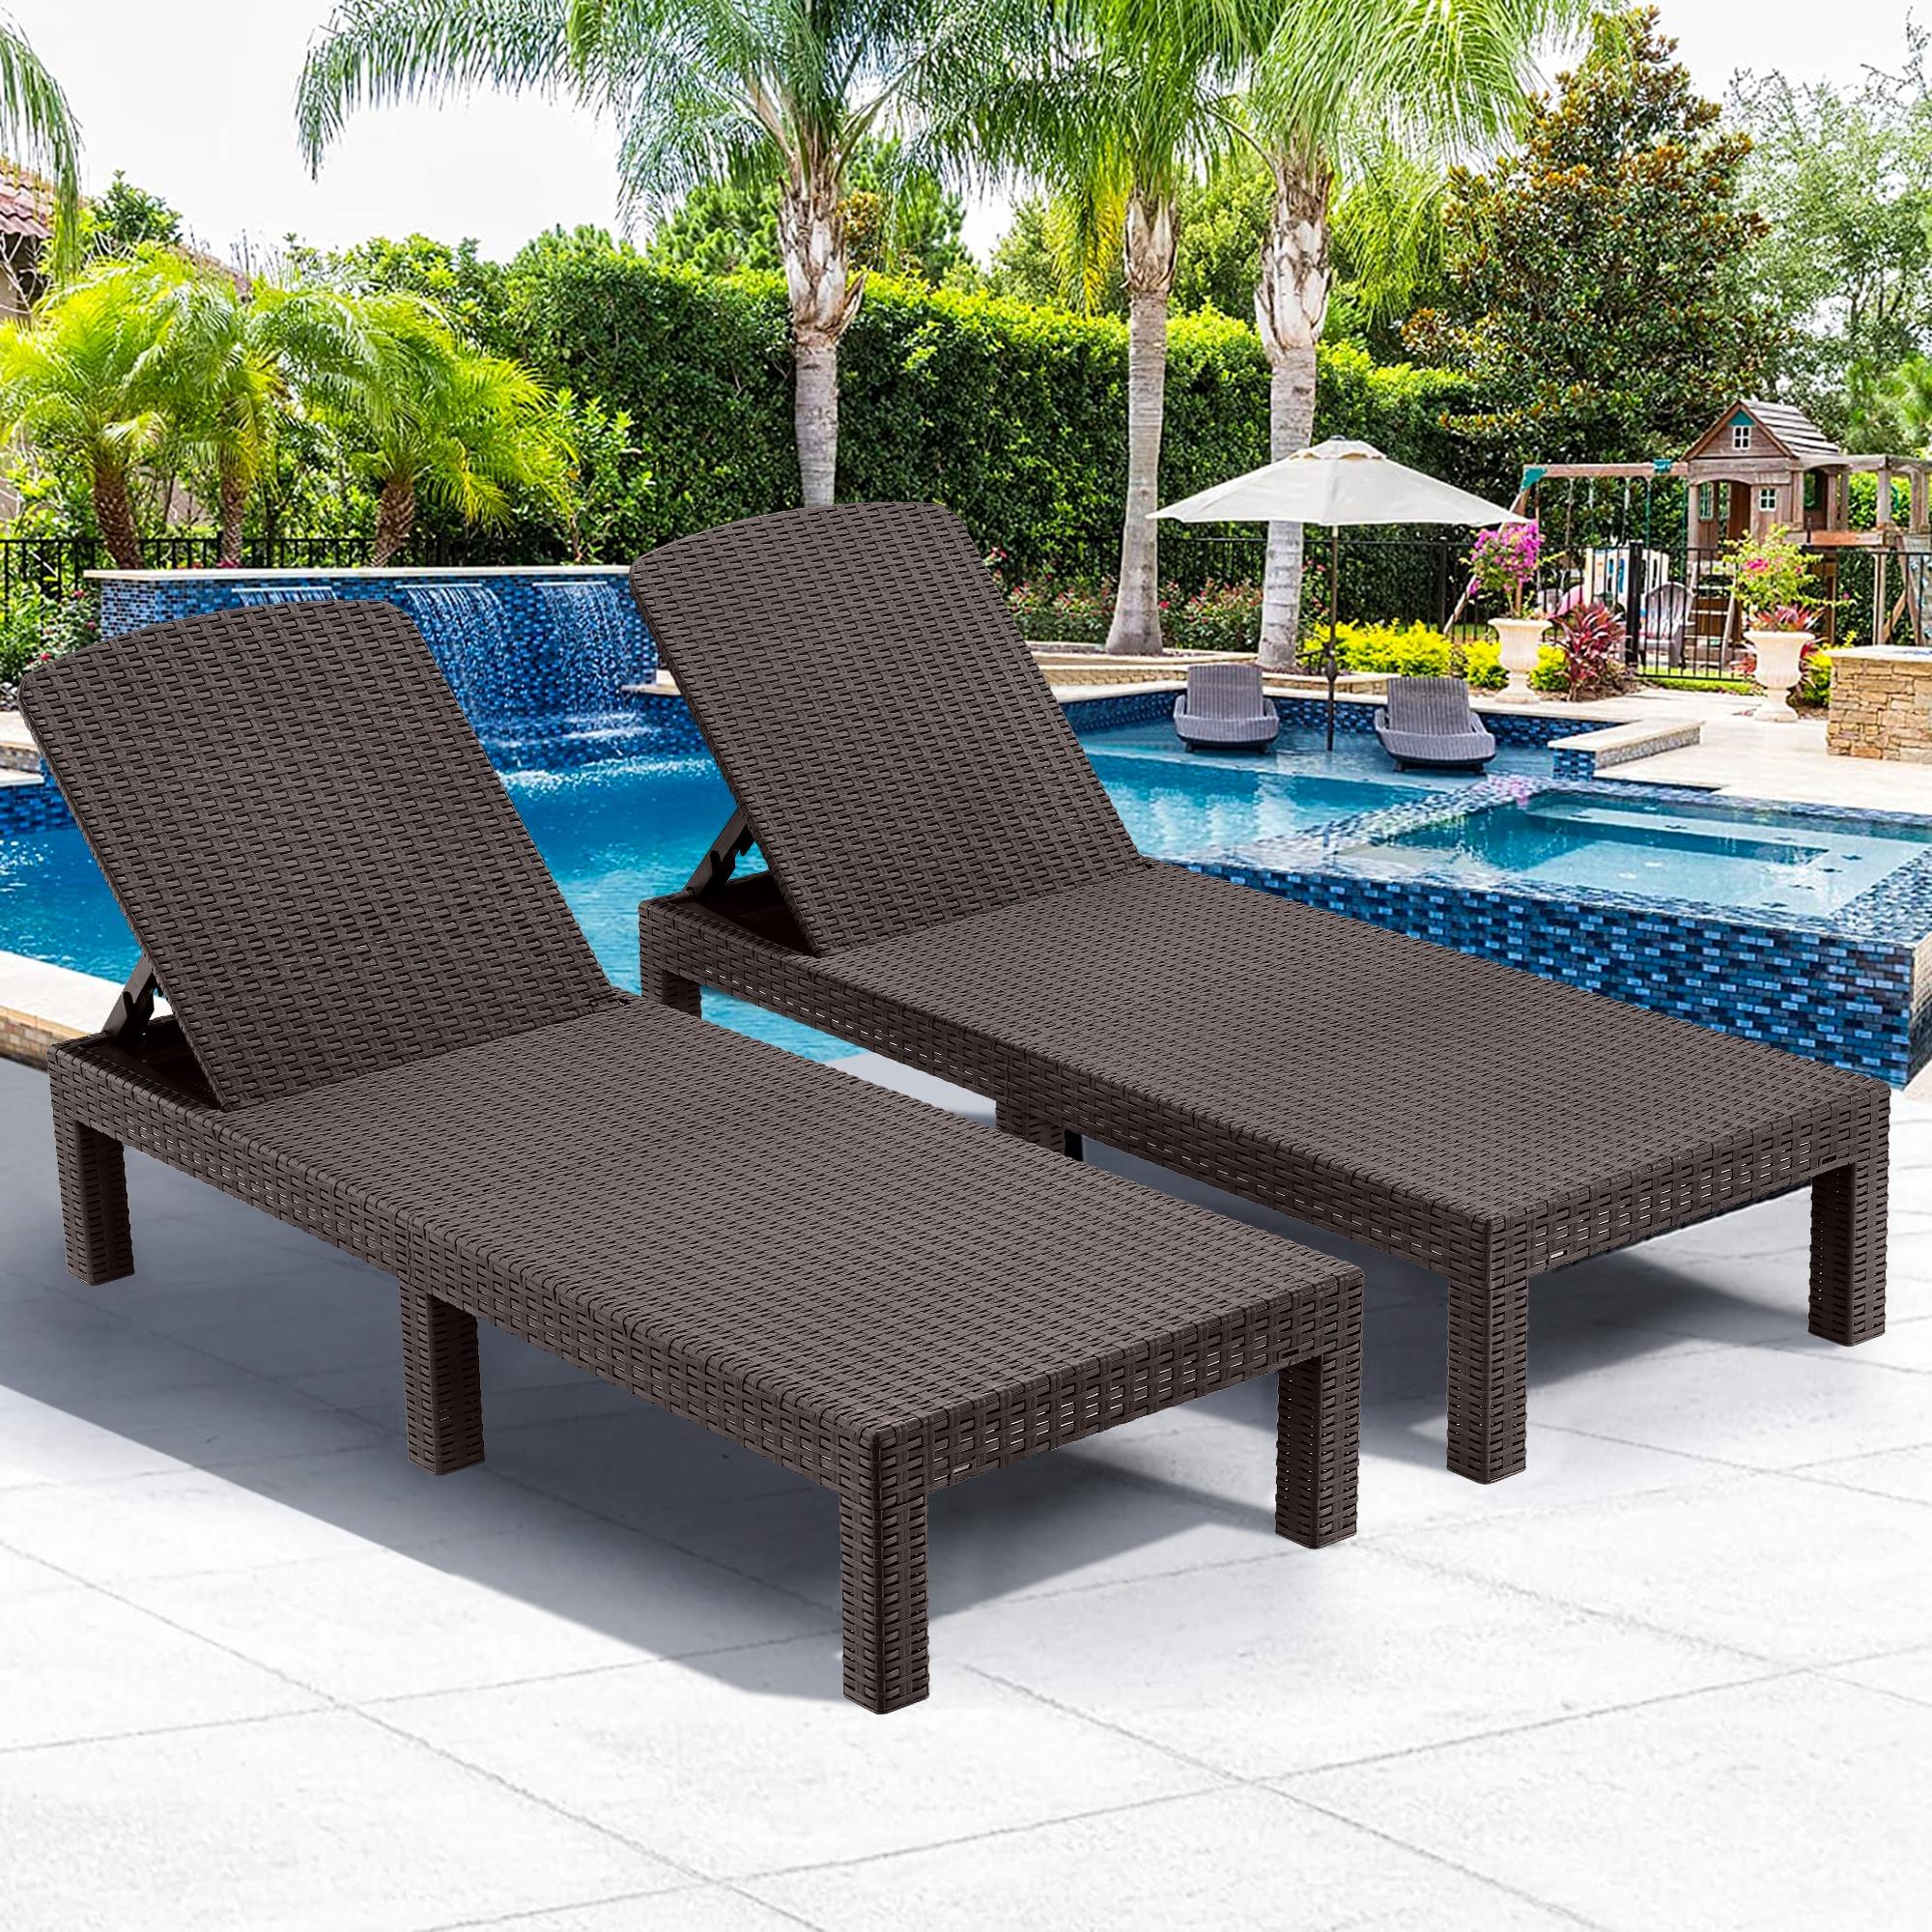 Syngar 2 Piece Chaise Lounge Set for Outside, Outdoor Adjustable Lounge Chairs Set of 2, Patio All-Weather PP Resin Reclining Chaise for Poolside Backyard Garden Porch, Espresso - image 3 of 10